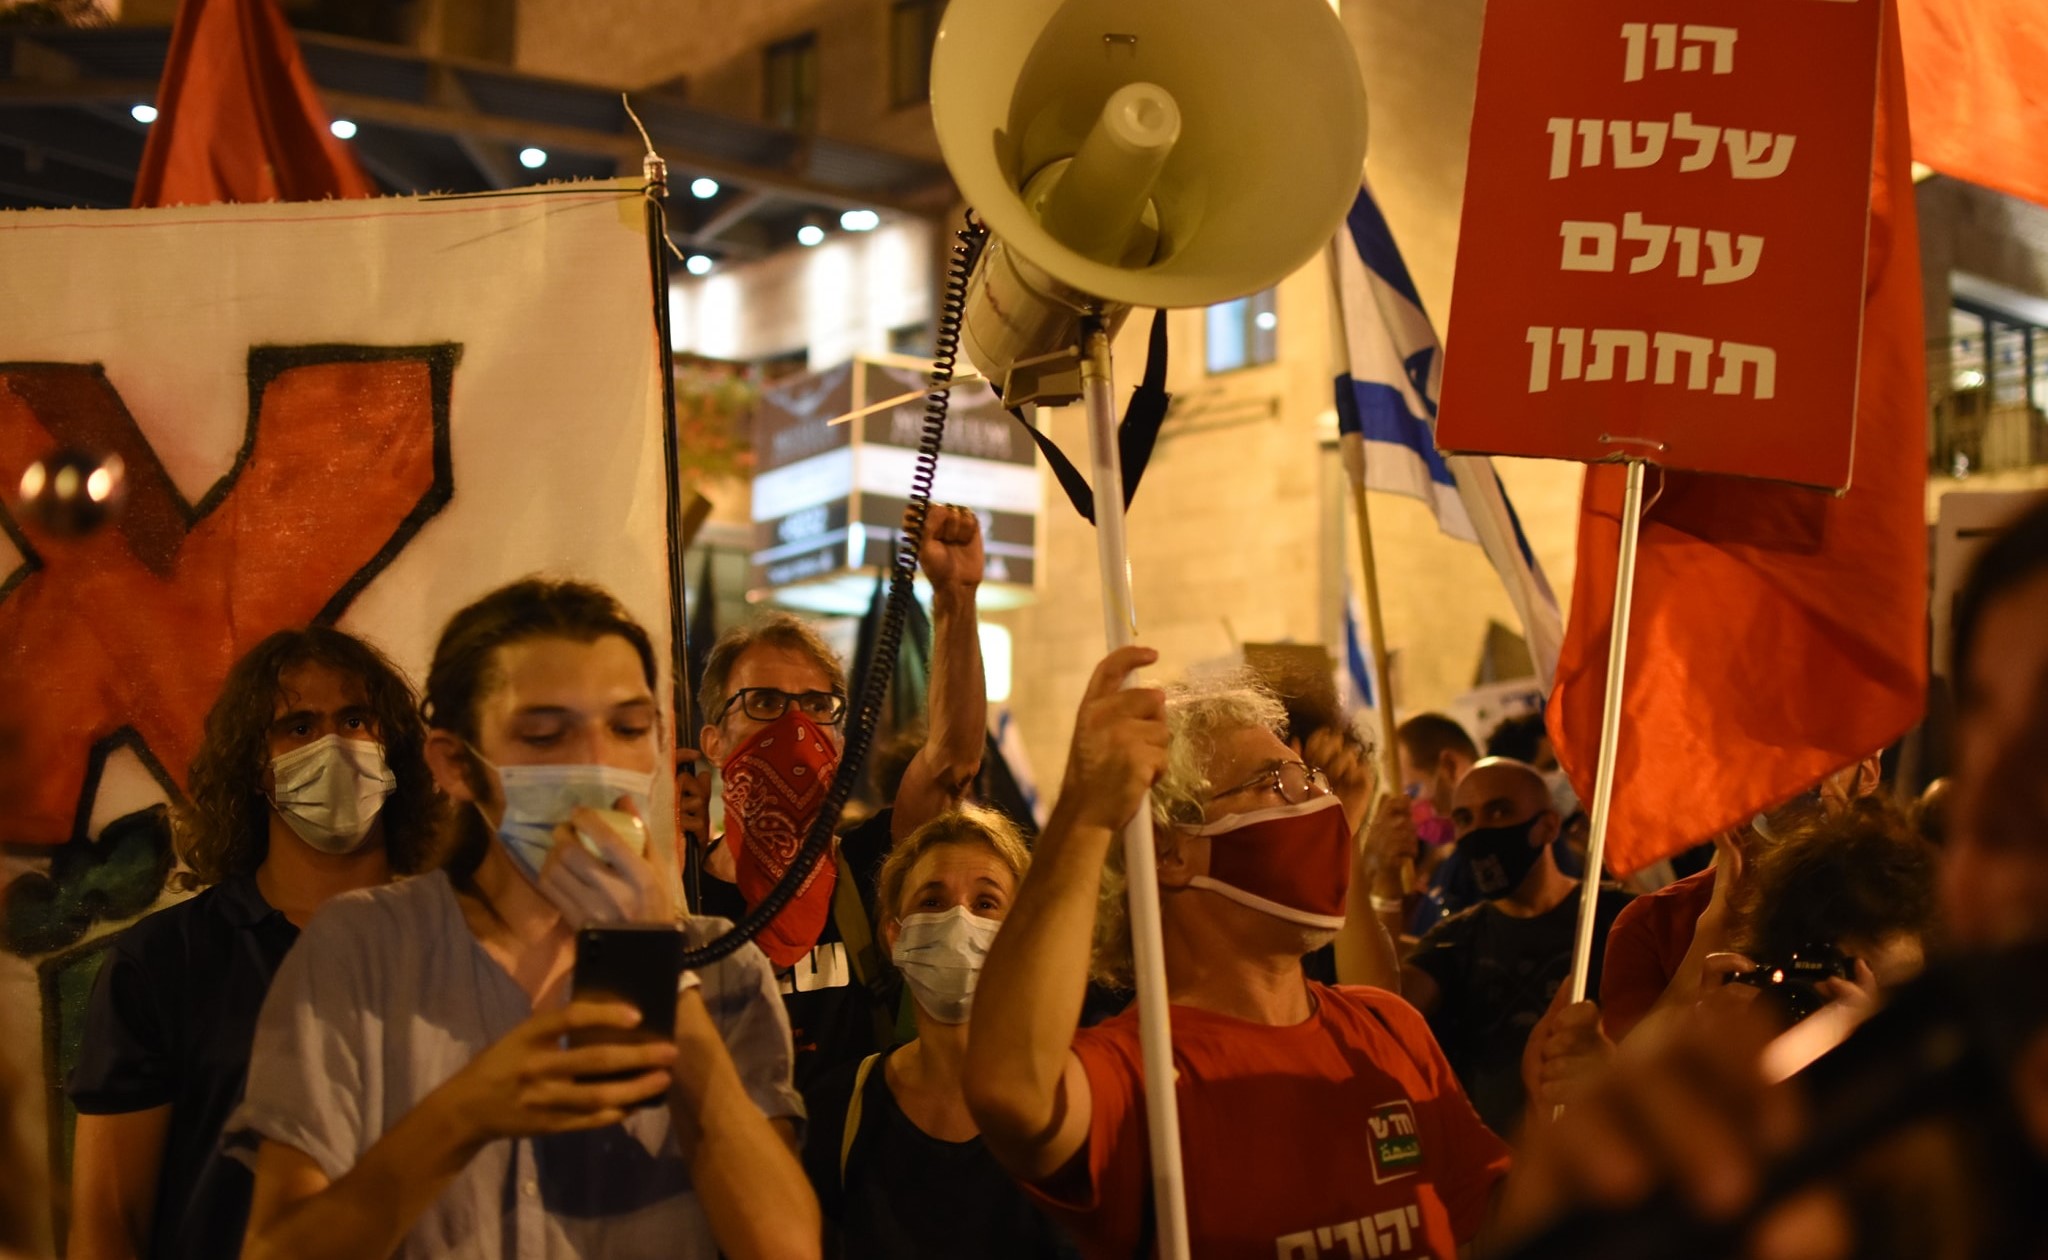 Activists from Hadash and Communist Party of Israel brandish red flags outside far-right Prime Minister Benjamin Netanyahu’s official residence in Jerusalem, Saturday night, September 5. The red sign at the right reads: "[The combination of ] Capital [and] government are an underworld."